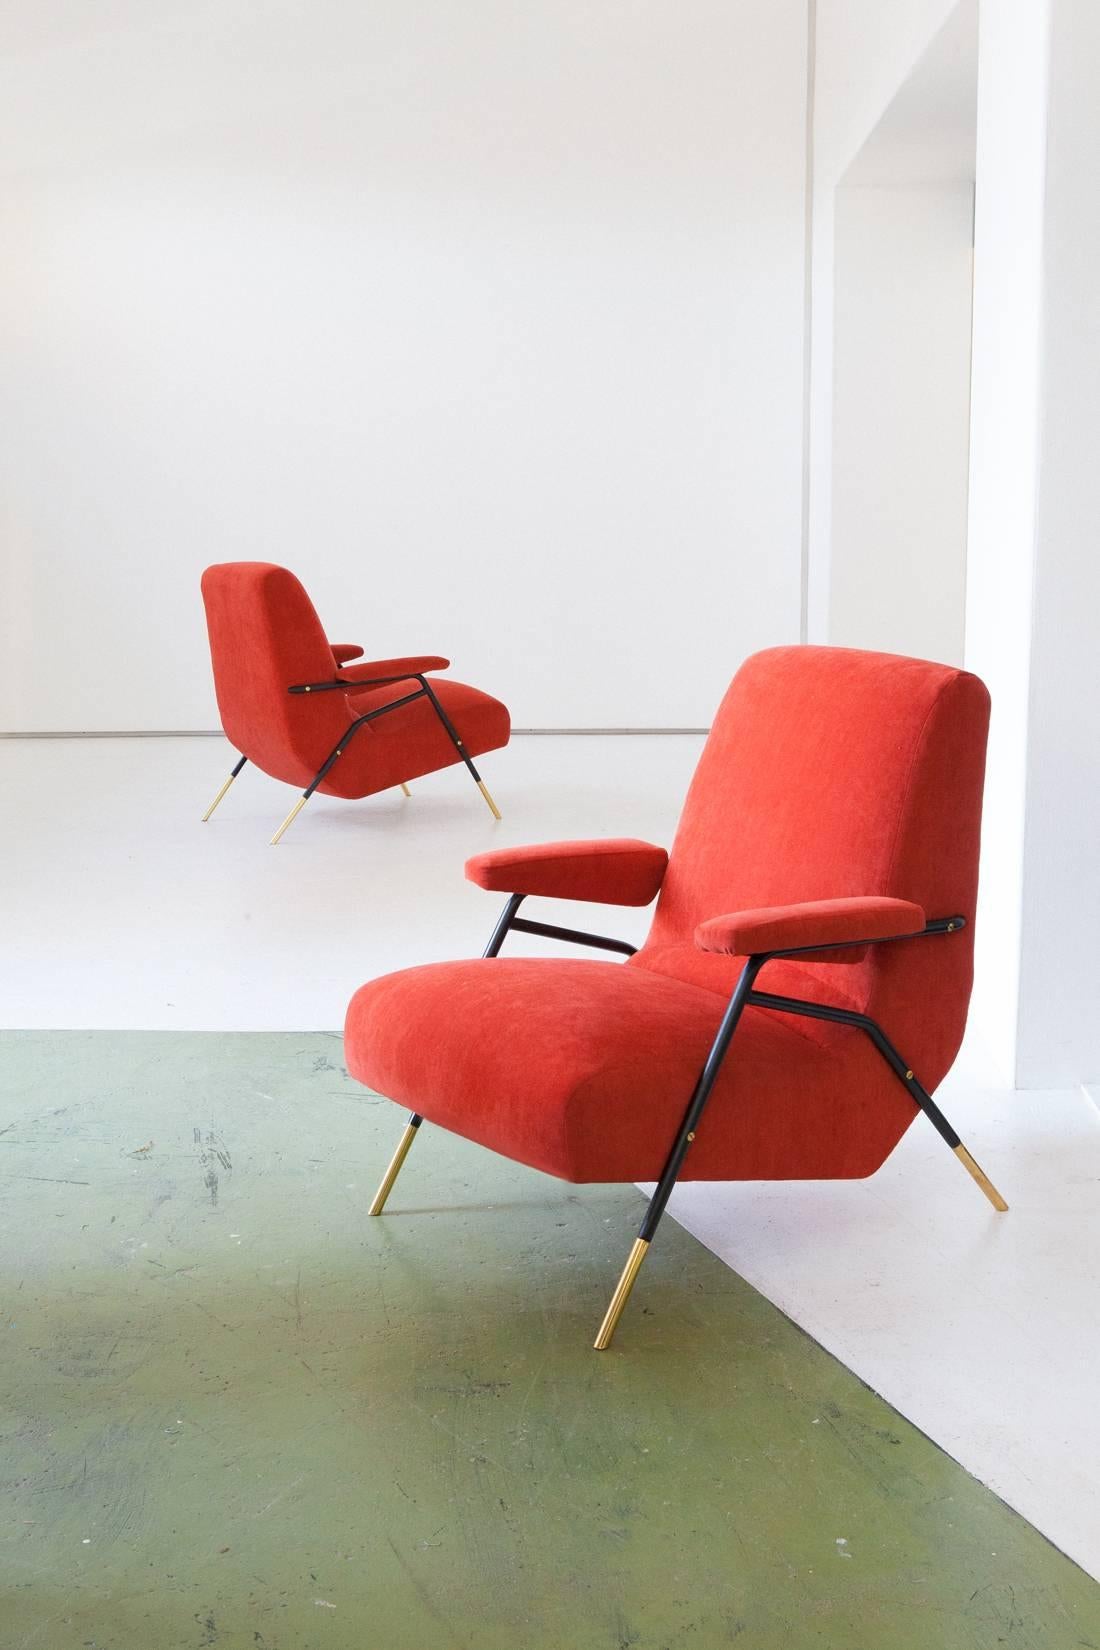 Pair of lounge chairs , Italy , 1950's
These easy chairs with armrests has a balck enameled Iron and polished brass frame , new orange velvet upholstery (the orange is more closed to the red than the yellow , also the padding is replaced ) . 
This